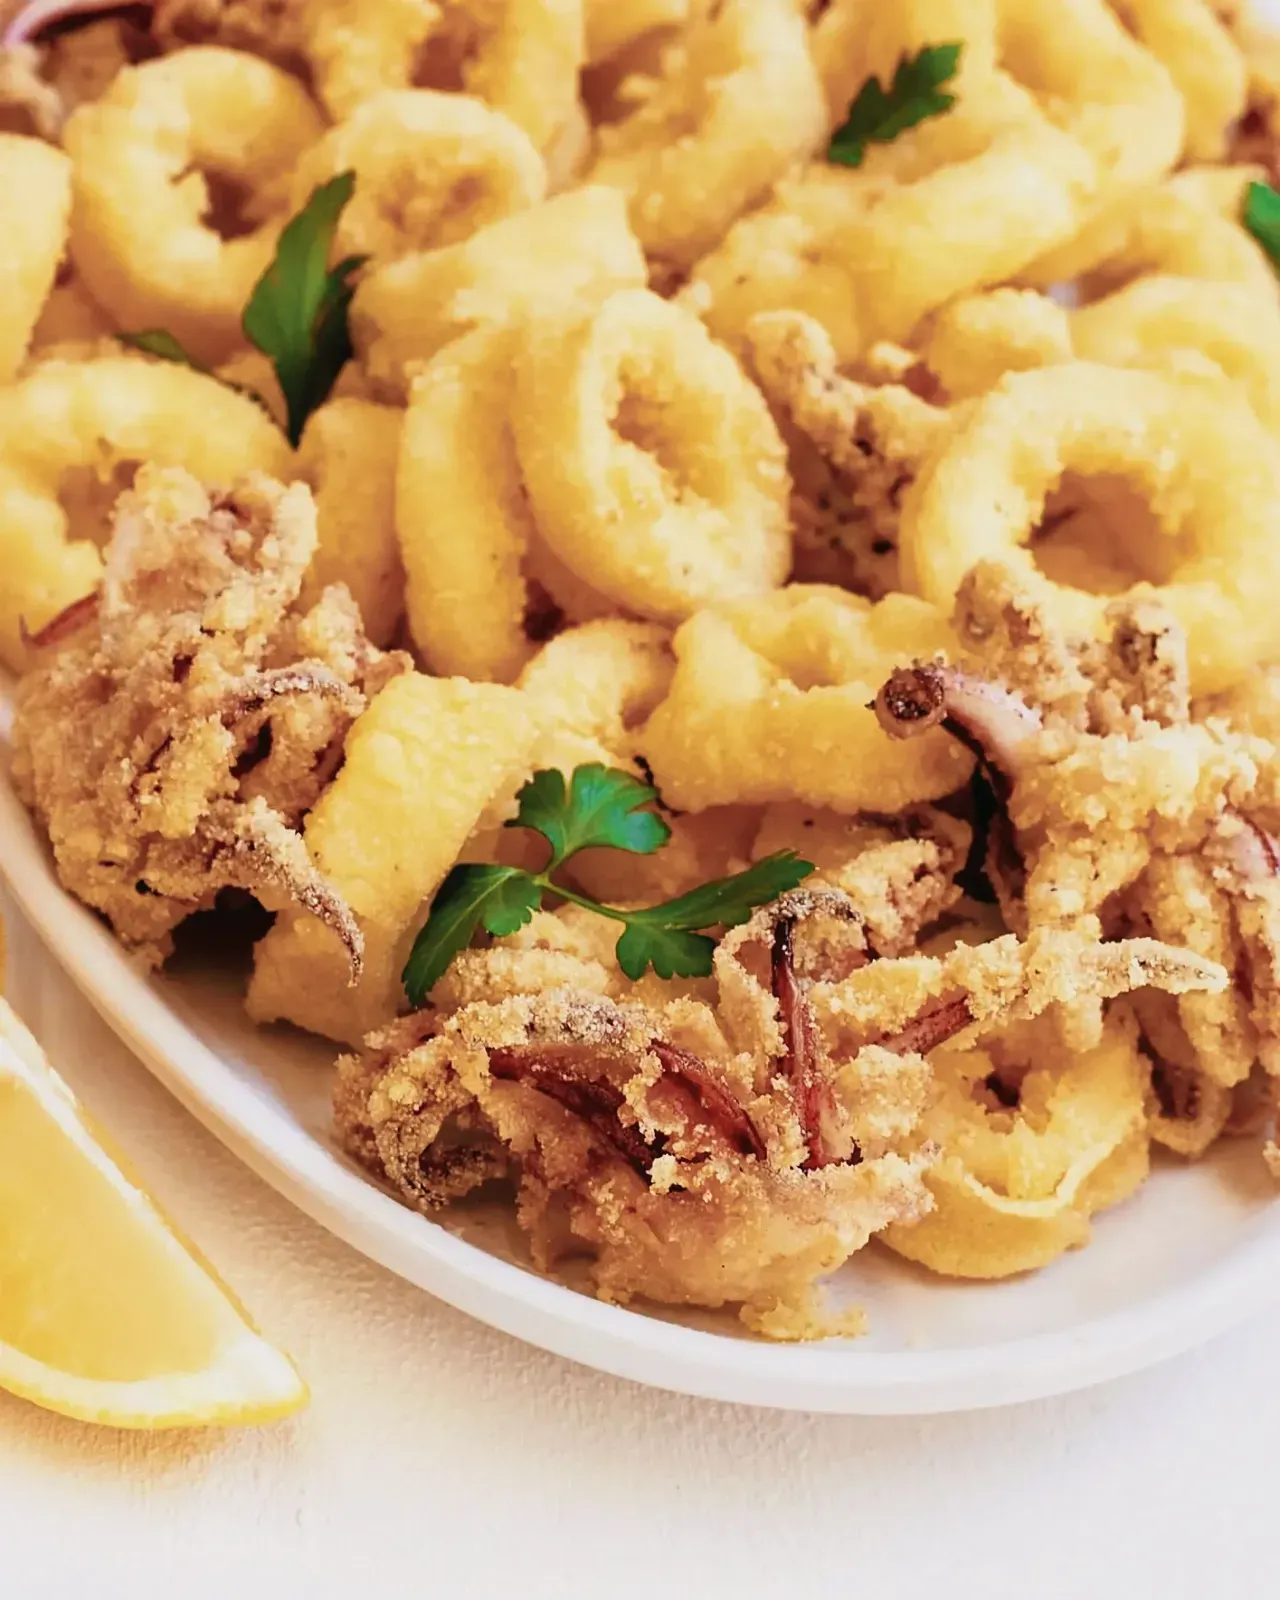 Delicious fried baby calamari served with lemon slice